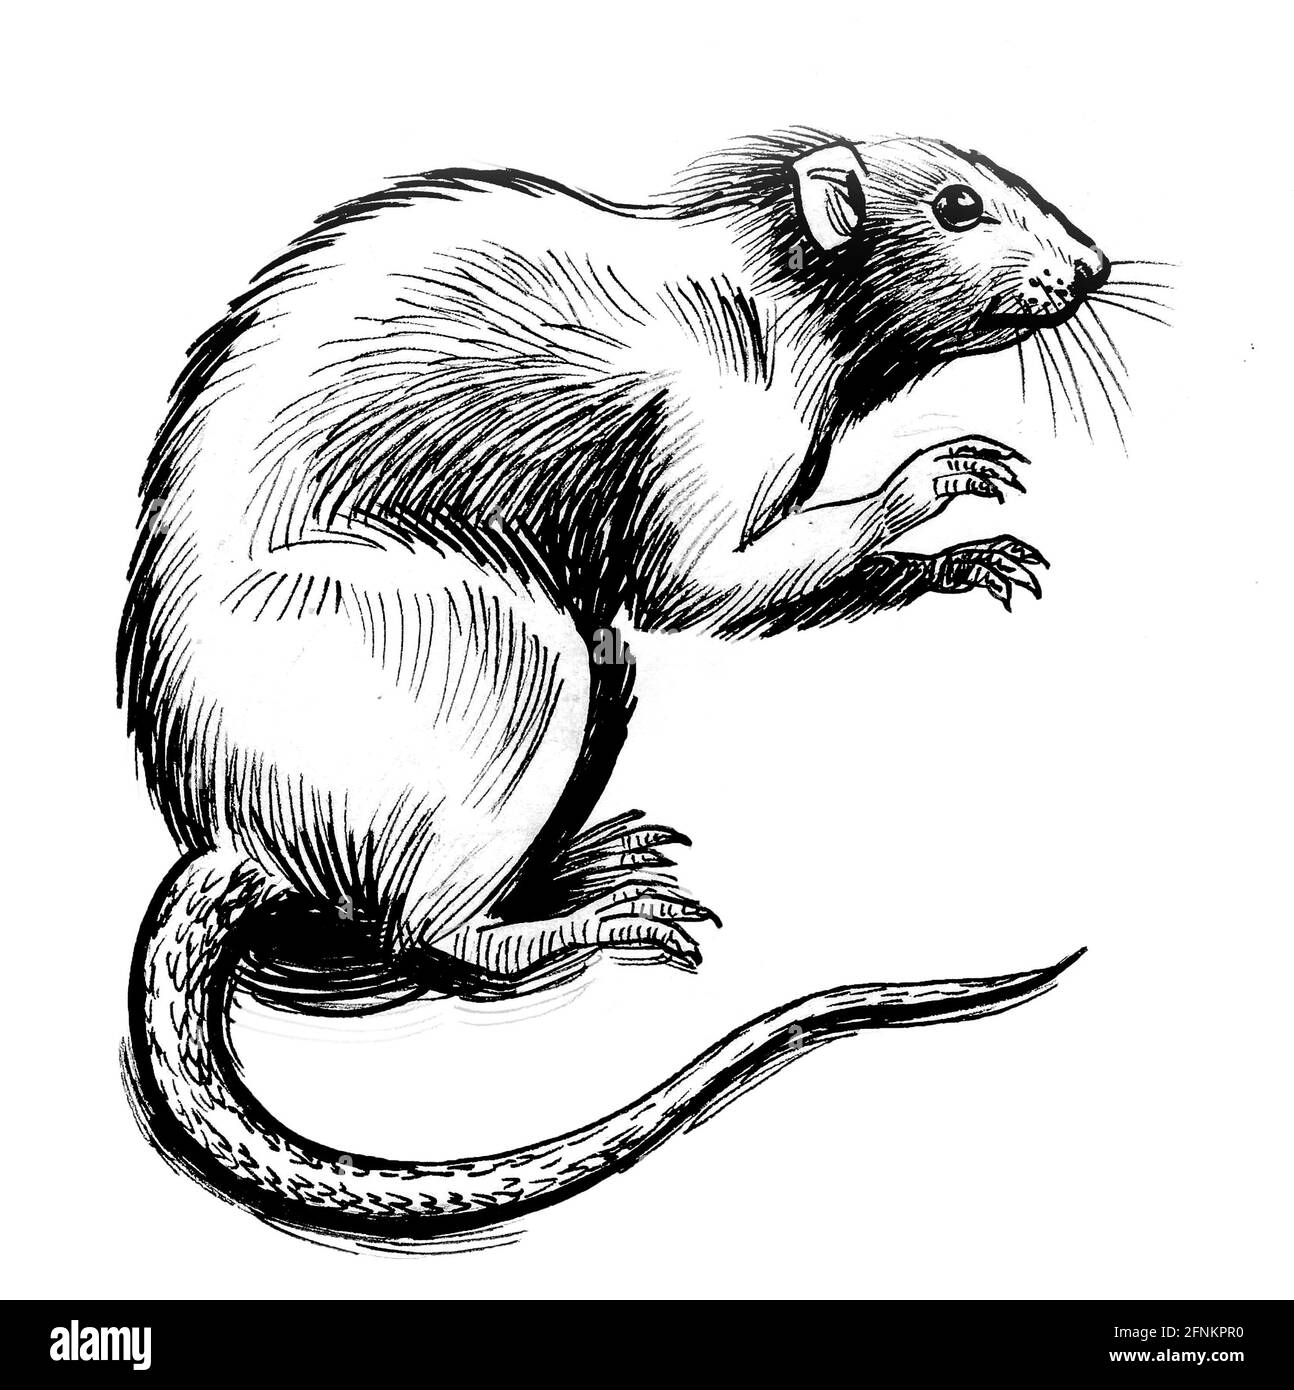 Rat animal standing on back legs. Ink black and white drawing Stock Photo